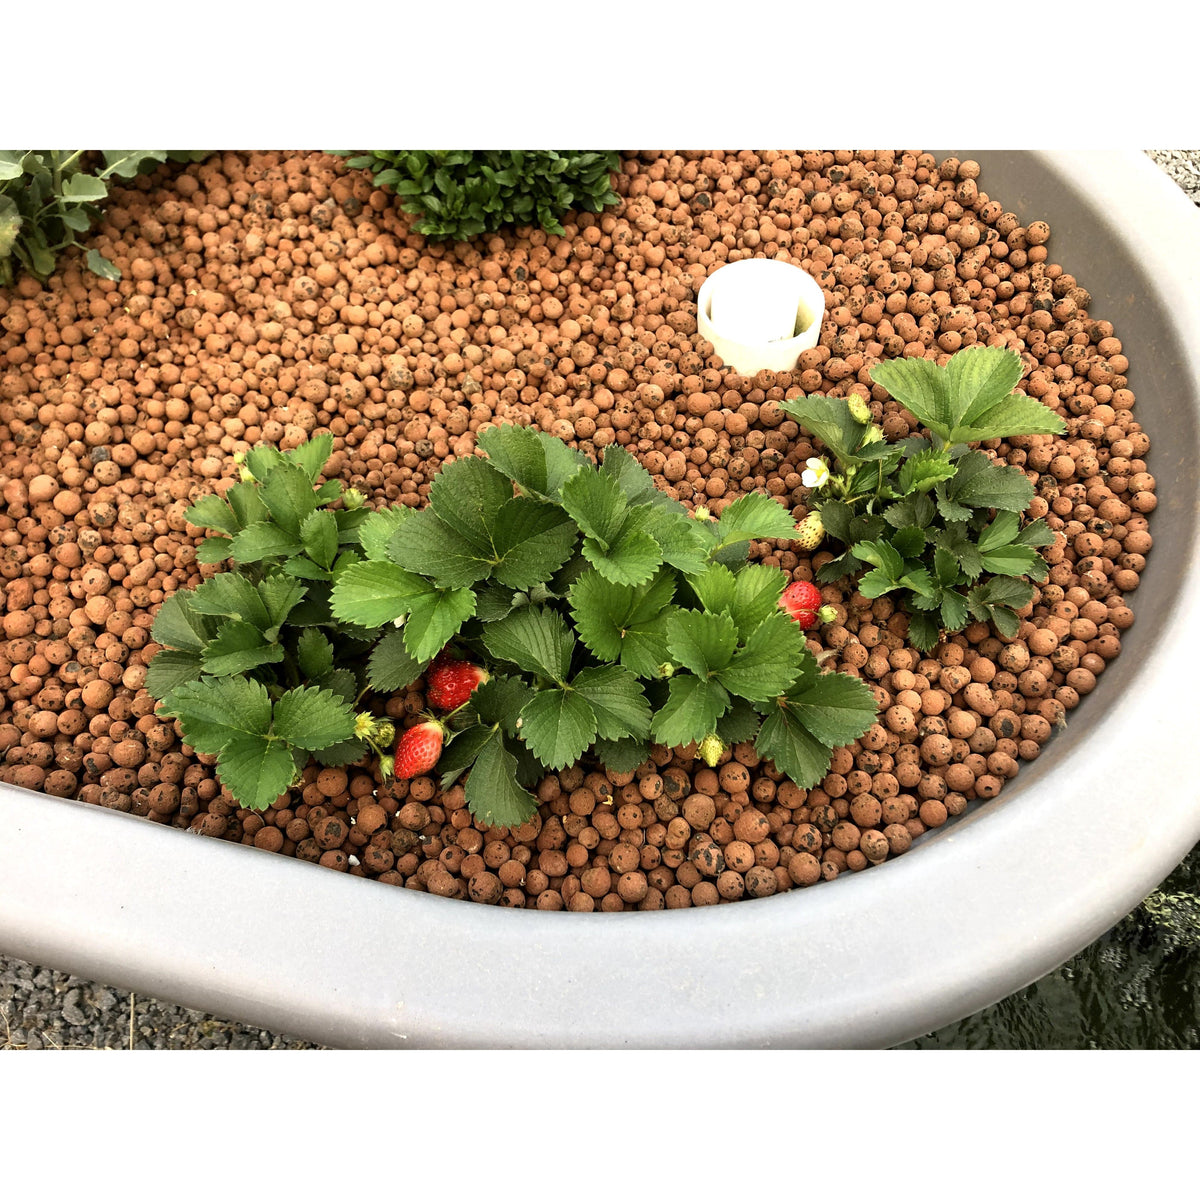 A garden with strawberries in the Go Green Double Aquaponics System by Go Green Aquaponics.